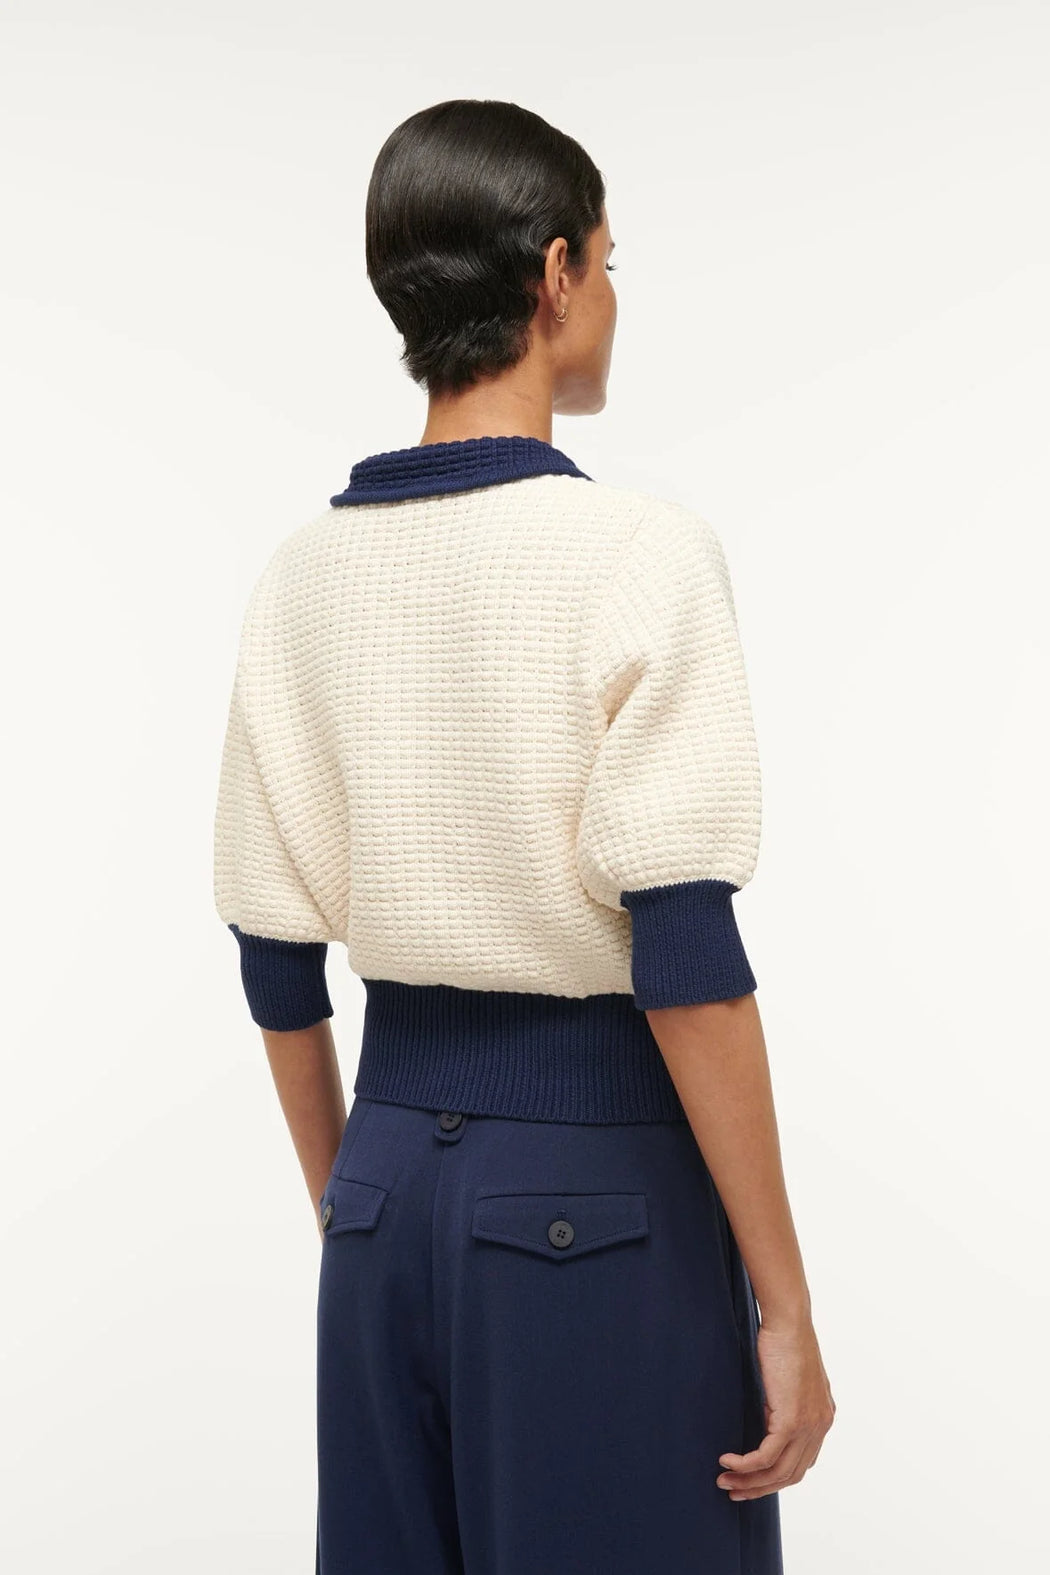 Staud - Altea Sweater in Ivory and Navy